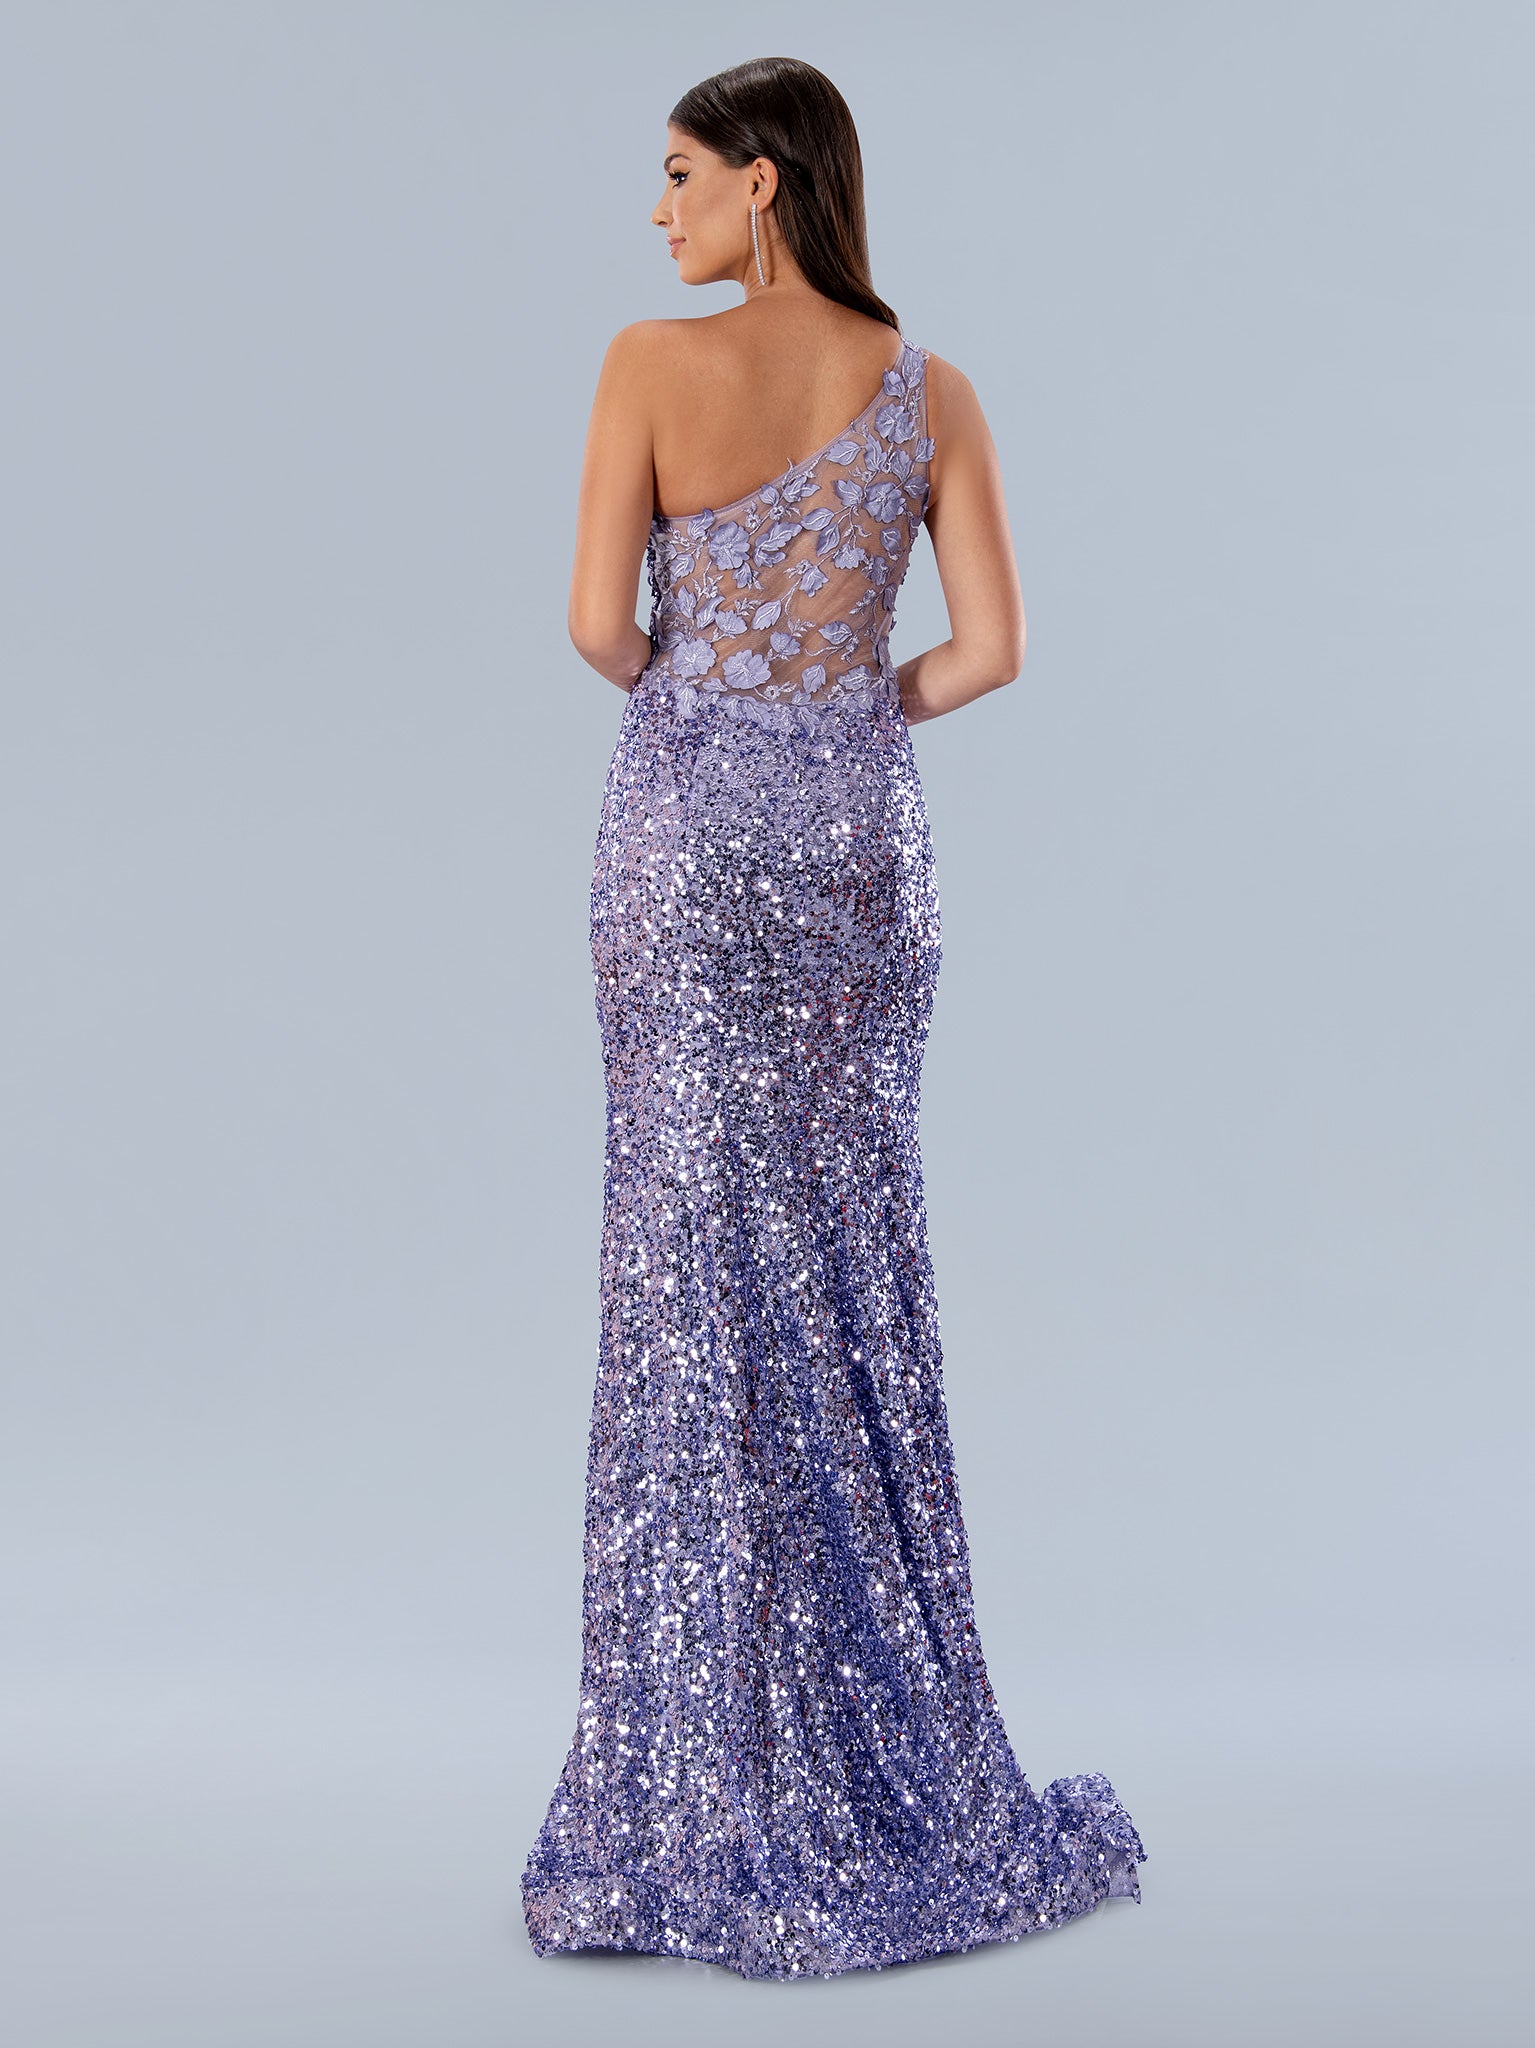 Stella Couture 24155 is a stunning One Shoulder Sequin Lace Prom Dress with a Sheer Back and 3d floral lace appliques. This elegant formal gown will make the perfect statement and turn heads at your special event.  Sizes: 0-16  Colors: Lilac